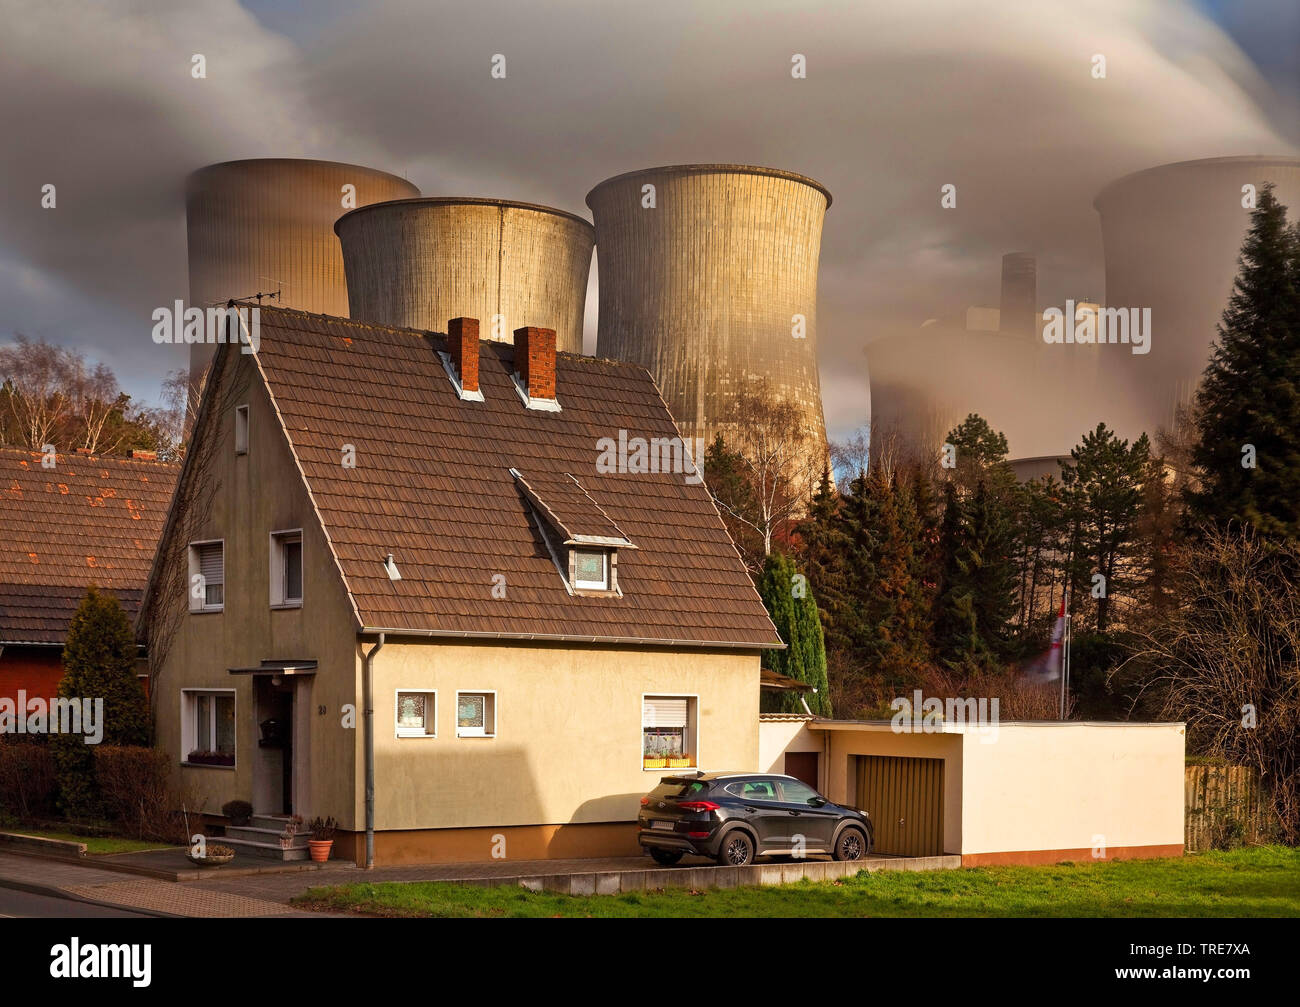 residential houses in district Auenheim in front of brown coal power station Niederaussem, Germany, North Rhine-Westphalia, Bergheim Stock Photo